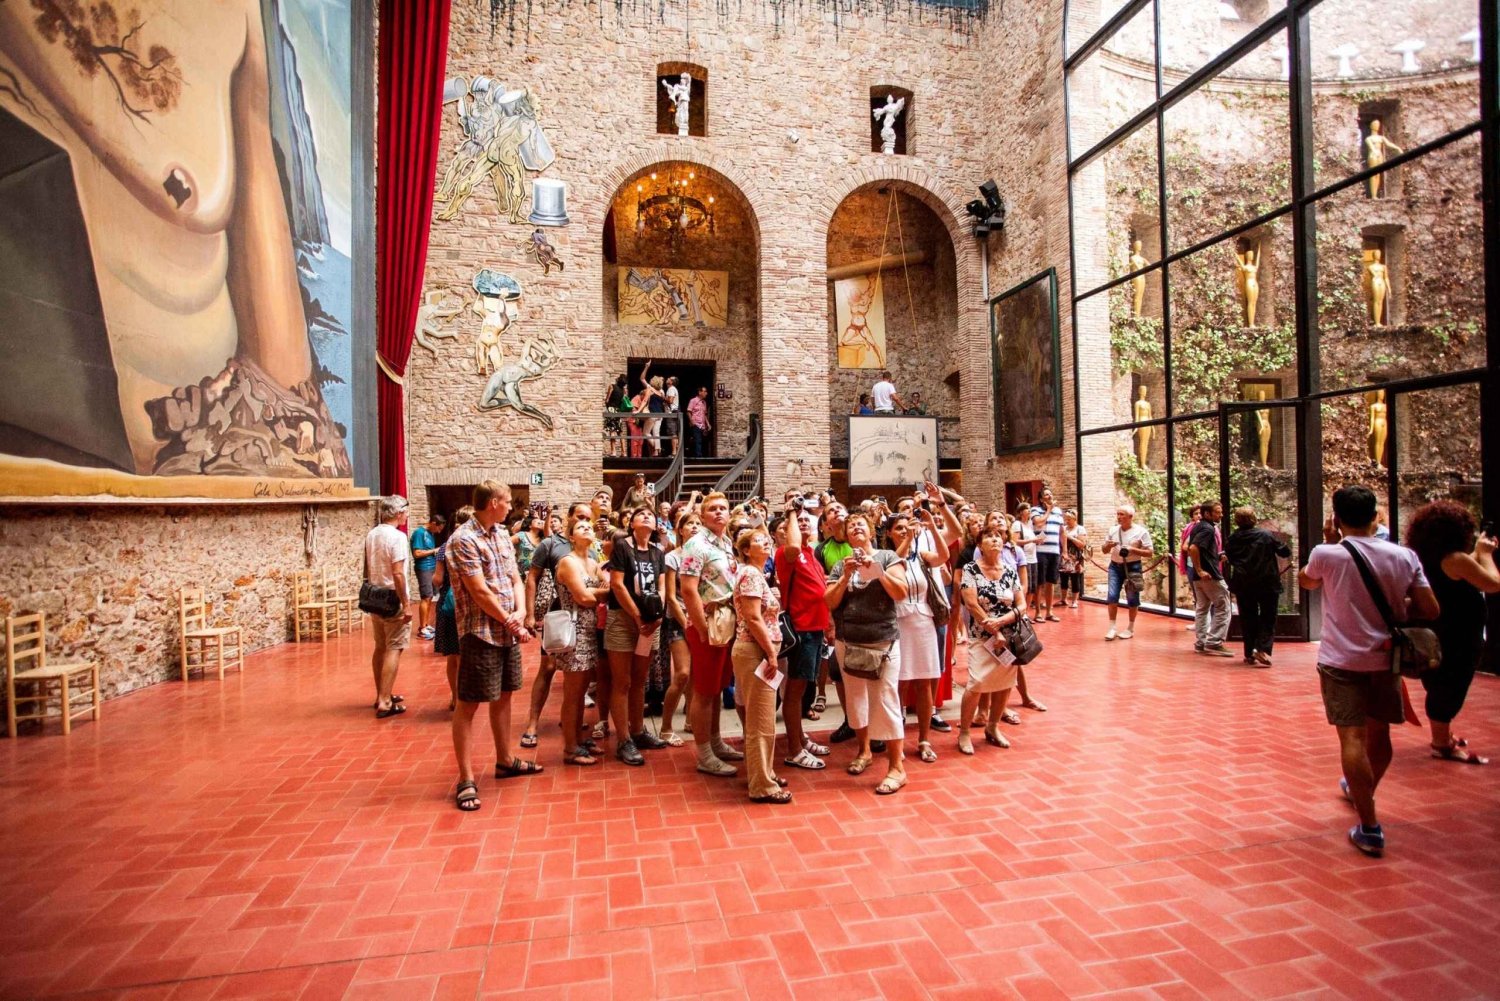 Salvador Dalí Small Group Full-Day Tour from Barcelona